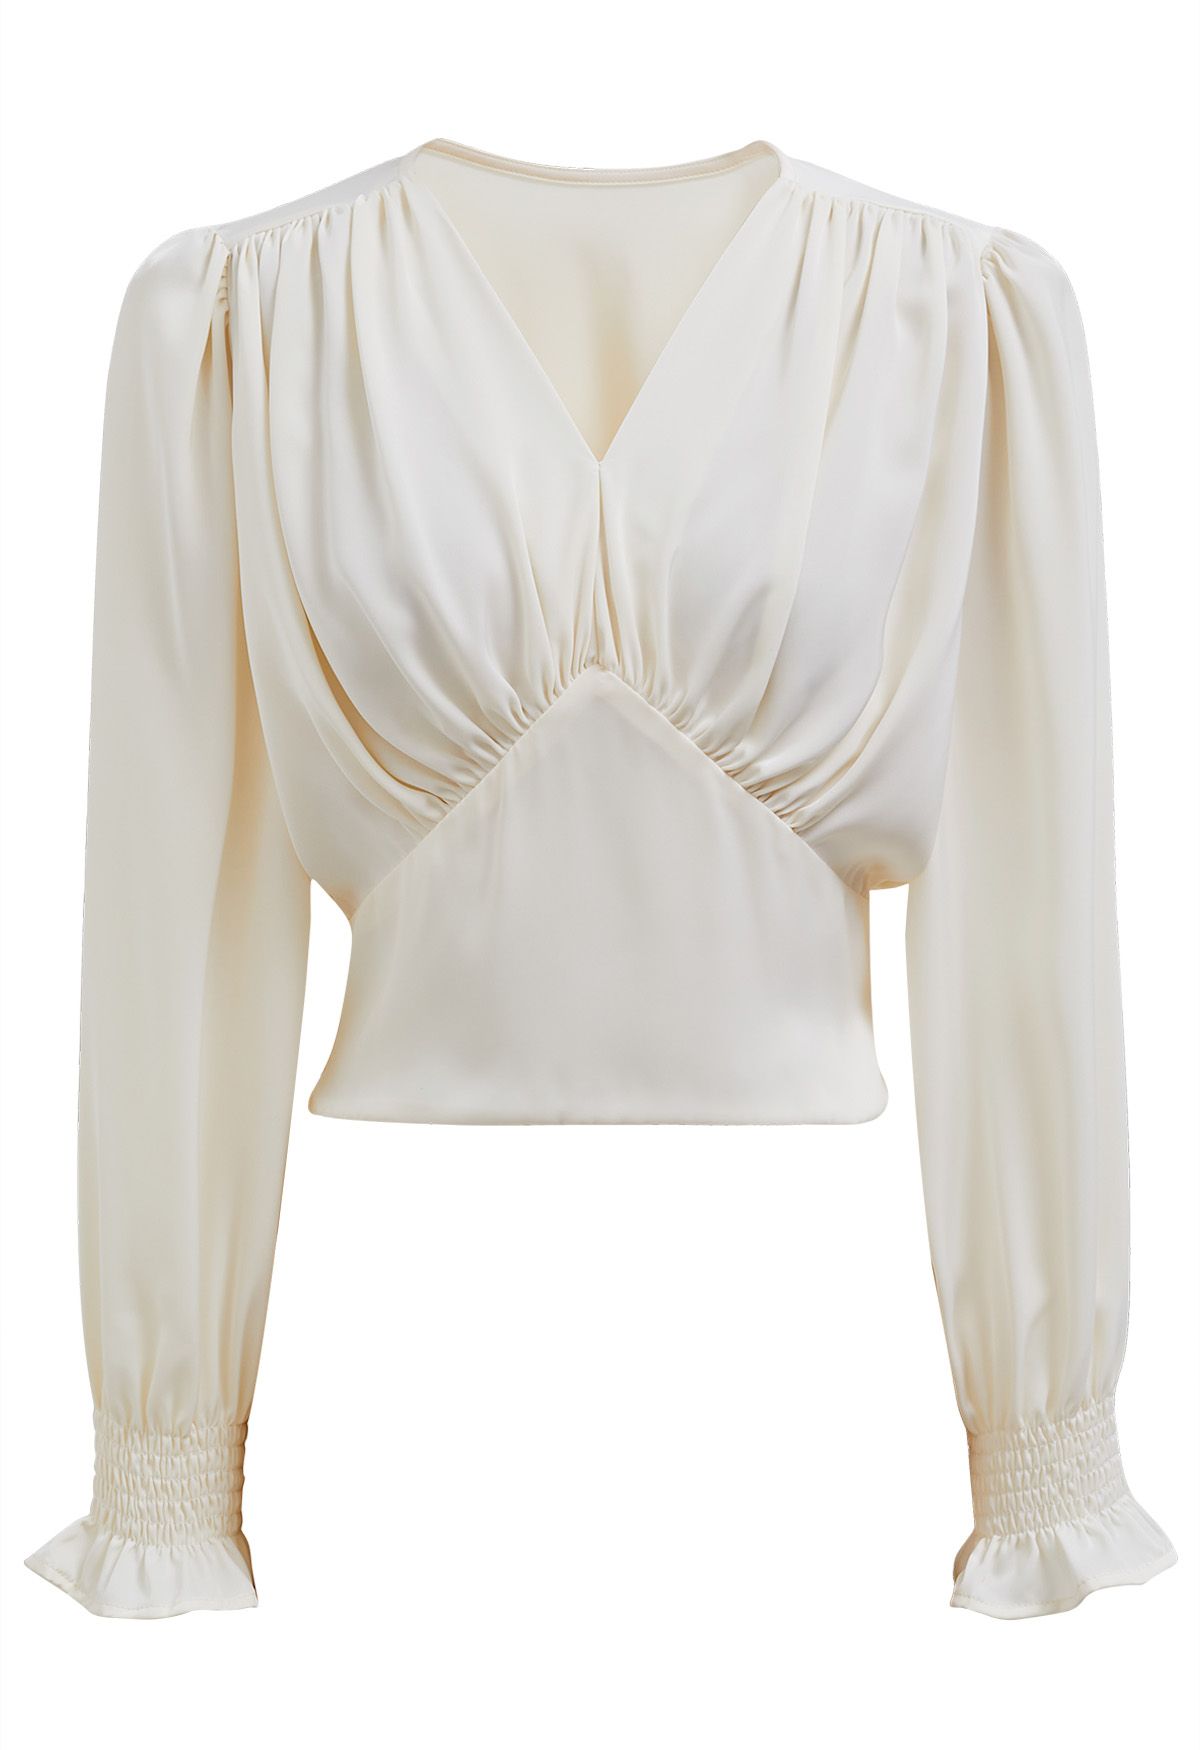 Satin Finish V-Neck Puff Sleeves Crop Top in Cream